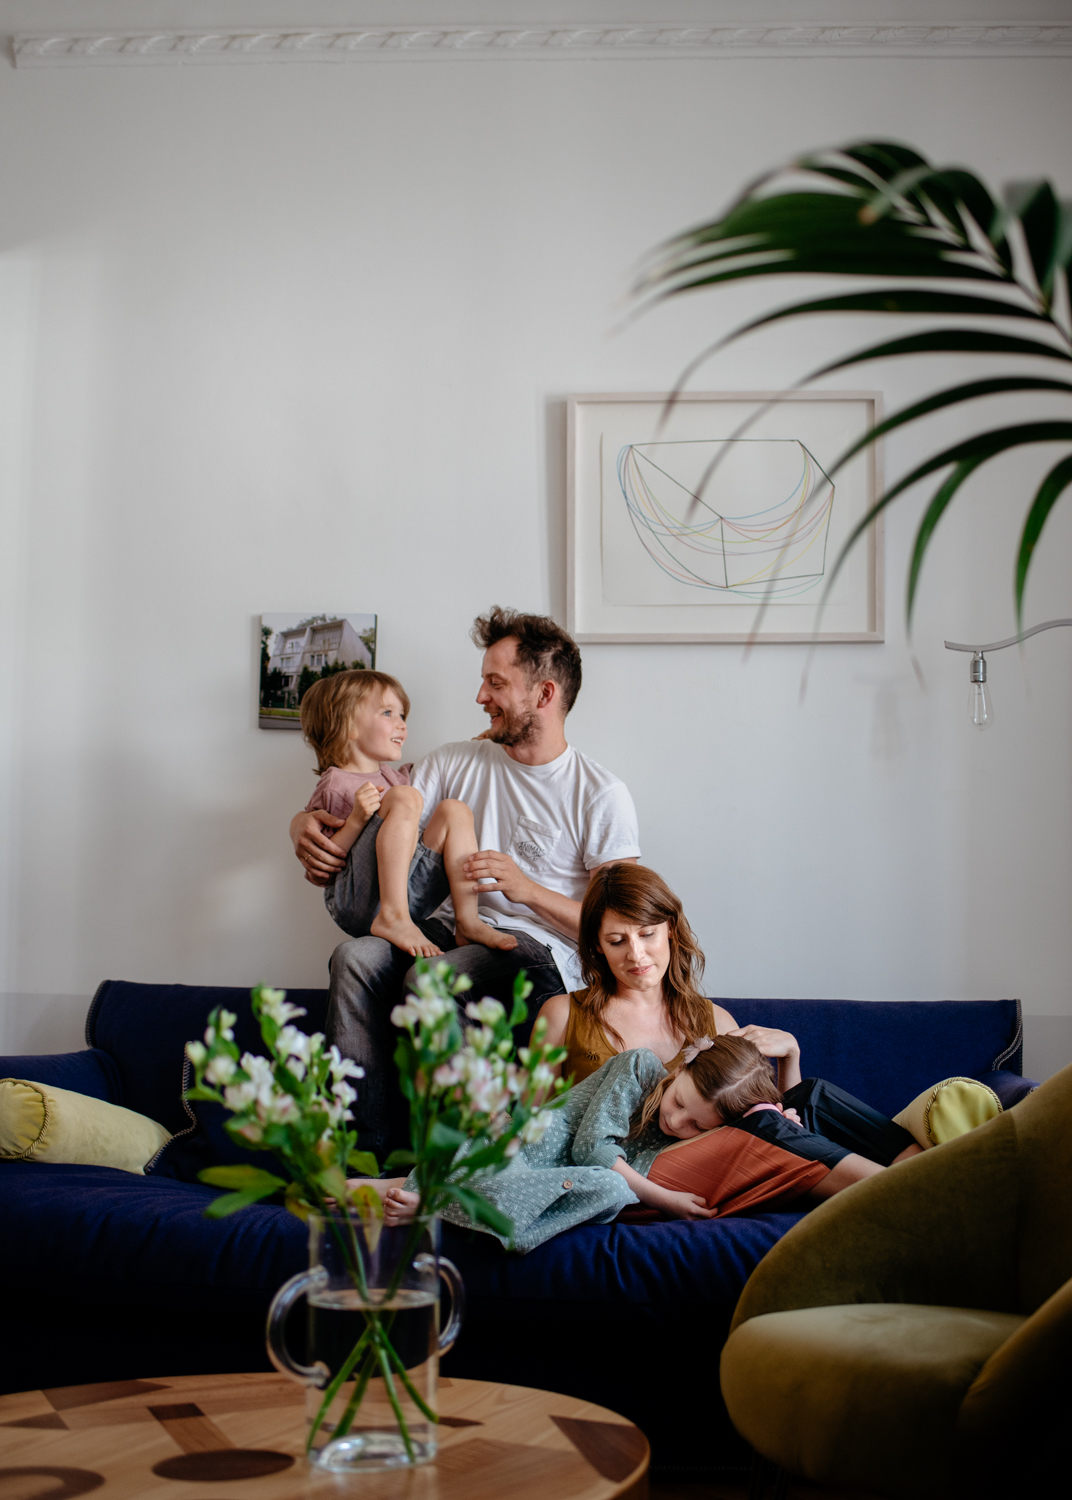 Family time enjoying a slow morning together, newborn baby photography in Bristol by Agi Lebiedz